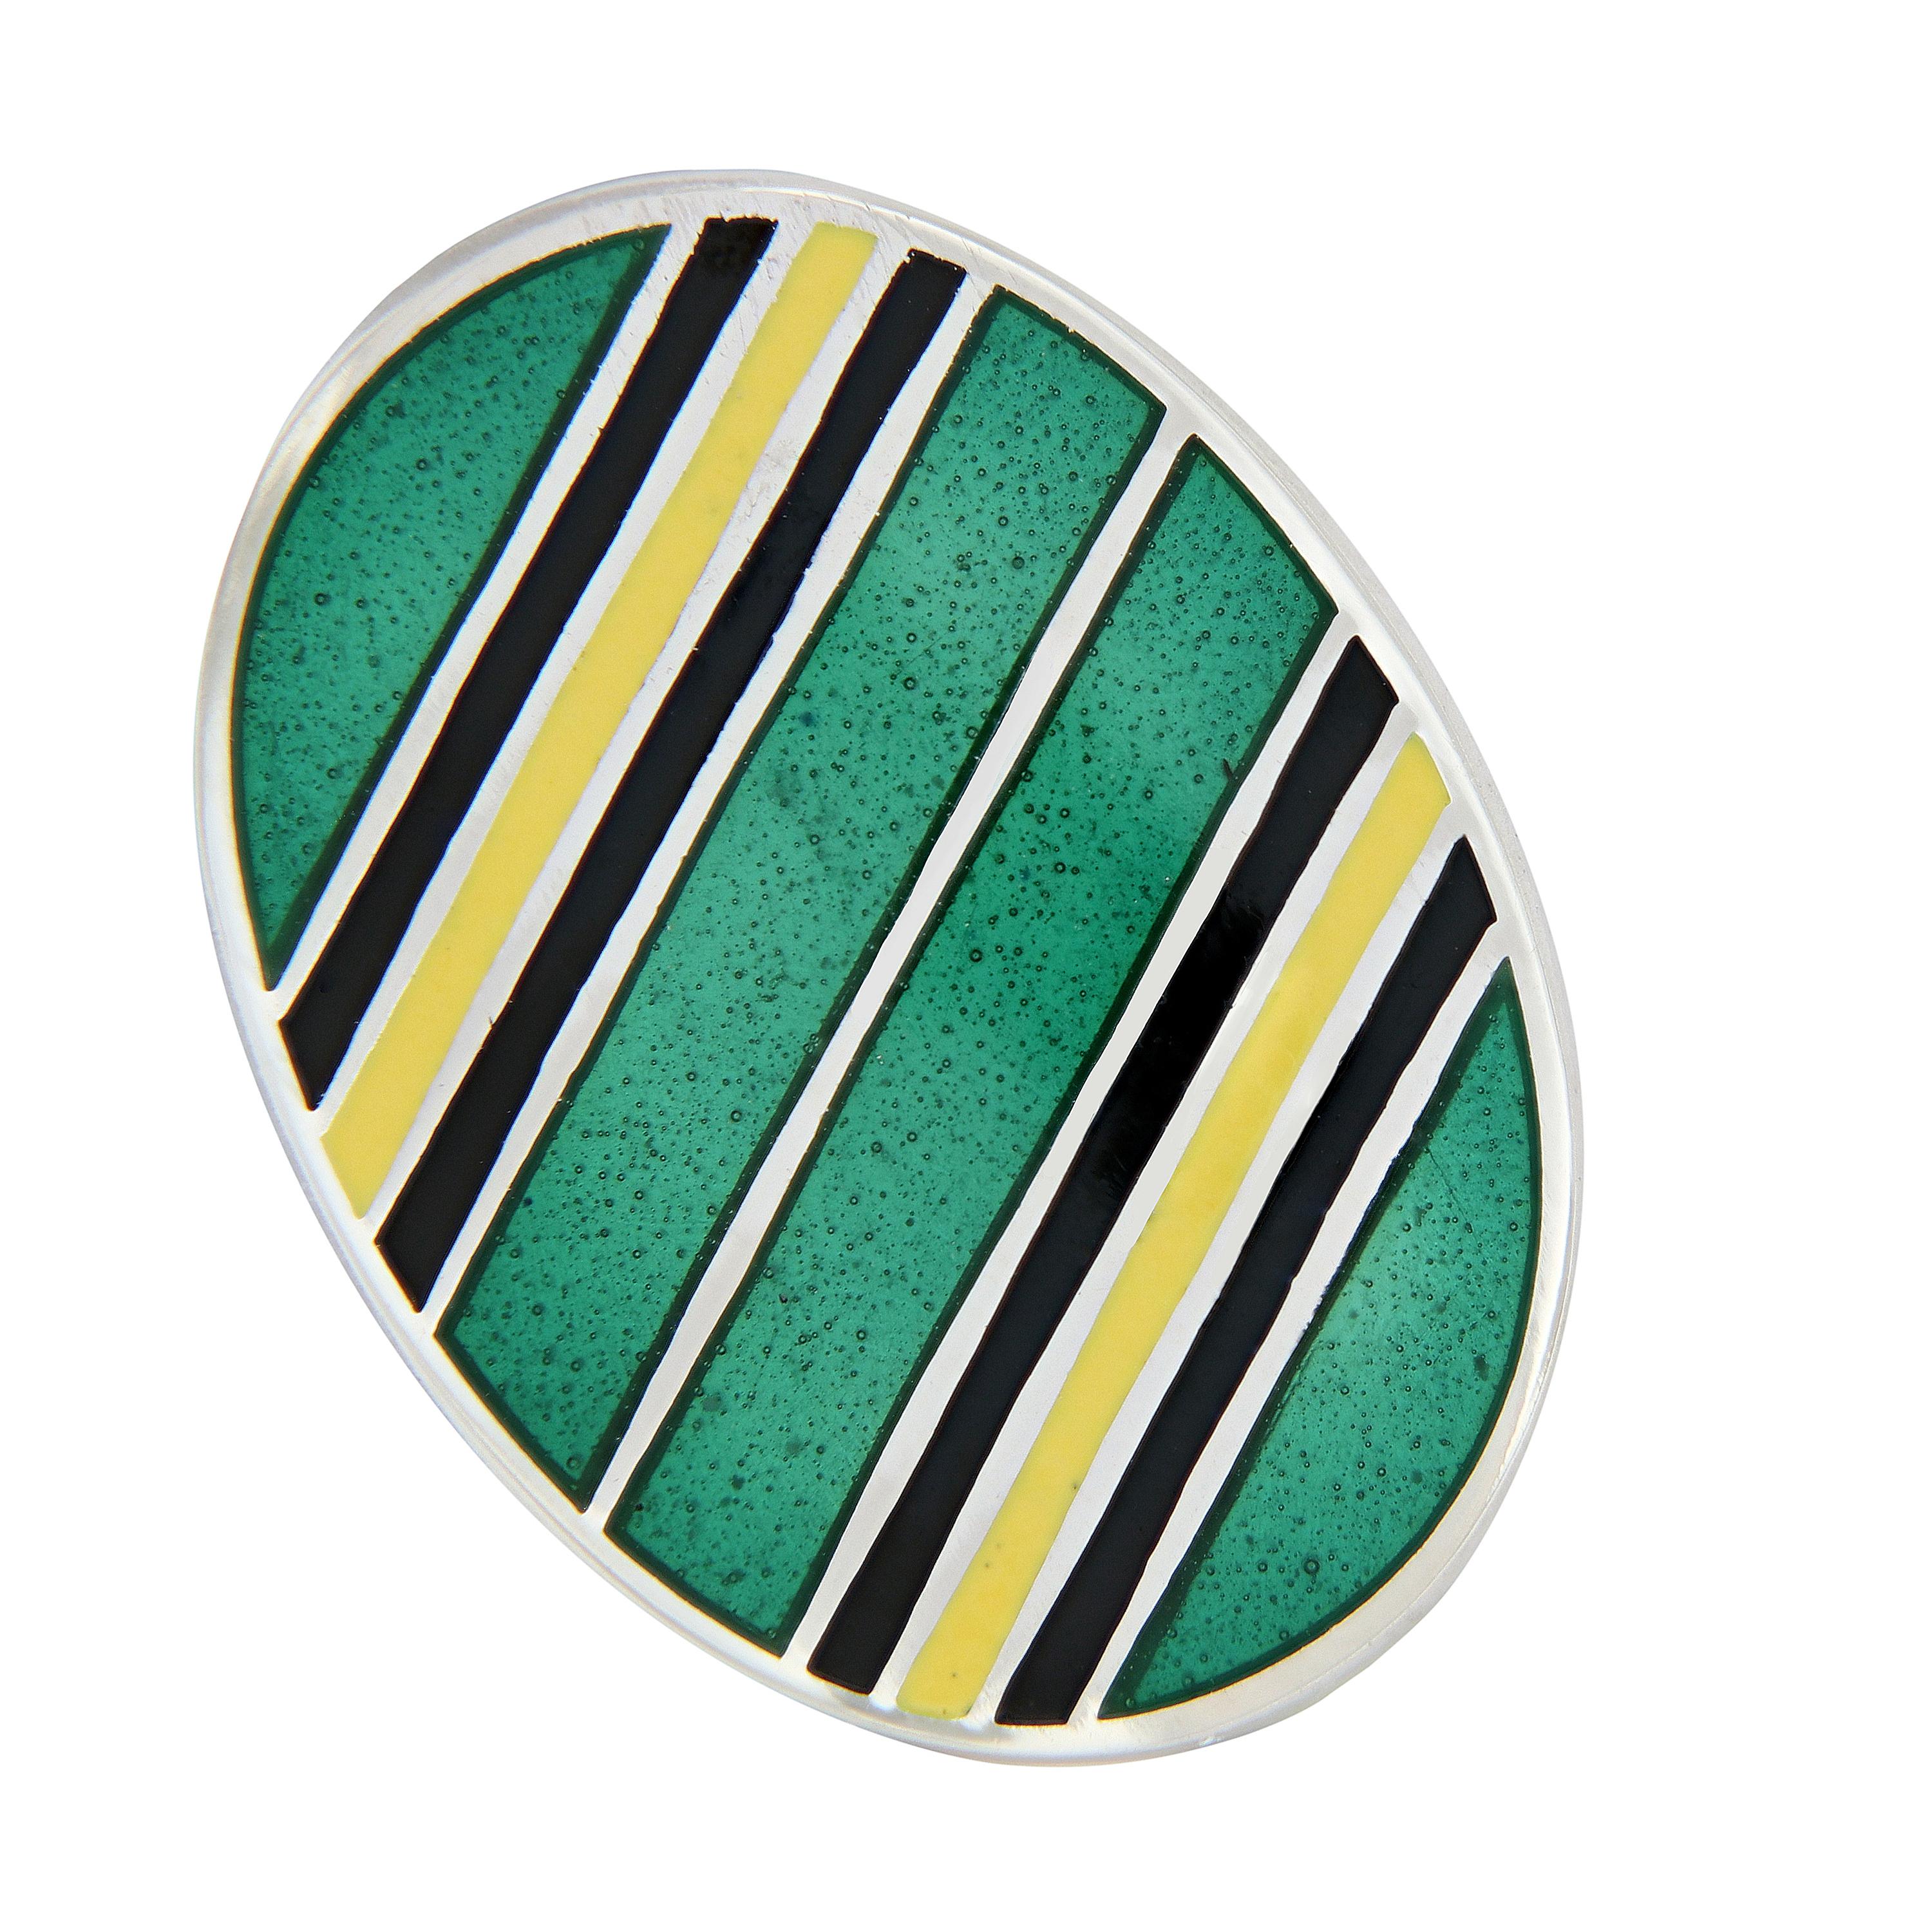 Beautiful Guilloche enamel stripe design cufflinks. Handmade in England for Campanelli & Pear. Weighs 12.6 grams. Oval measures 14mm x 19mm.